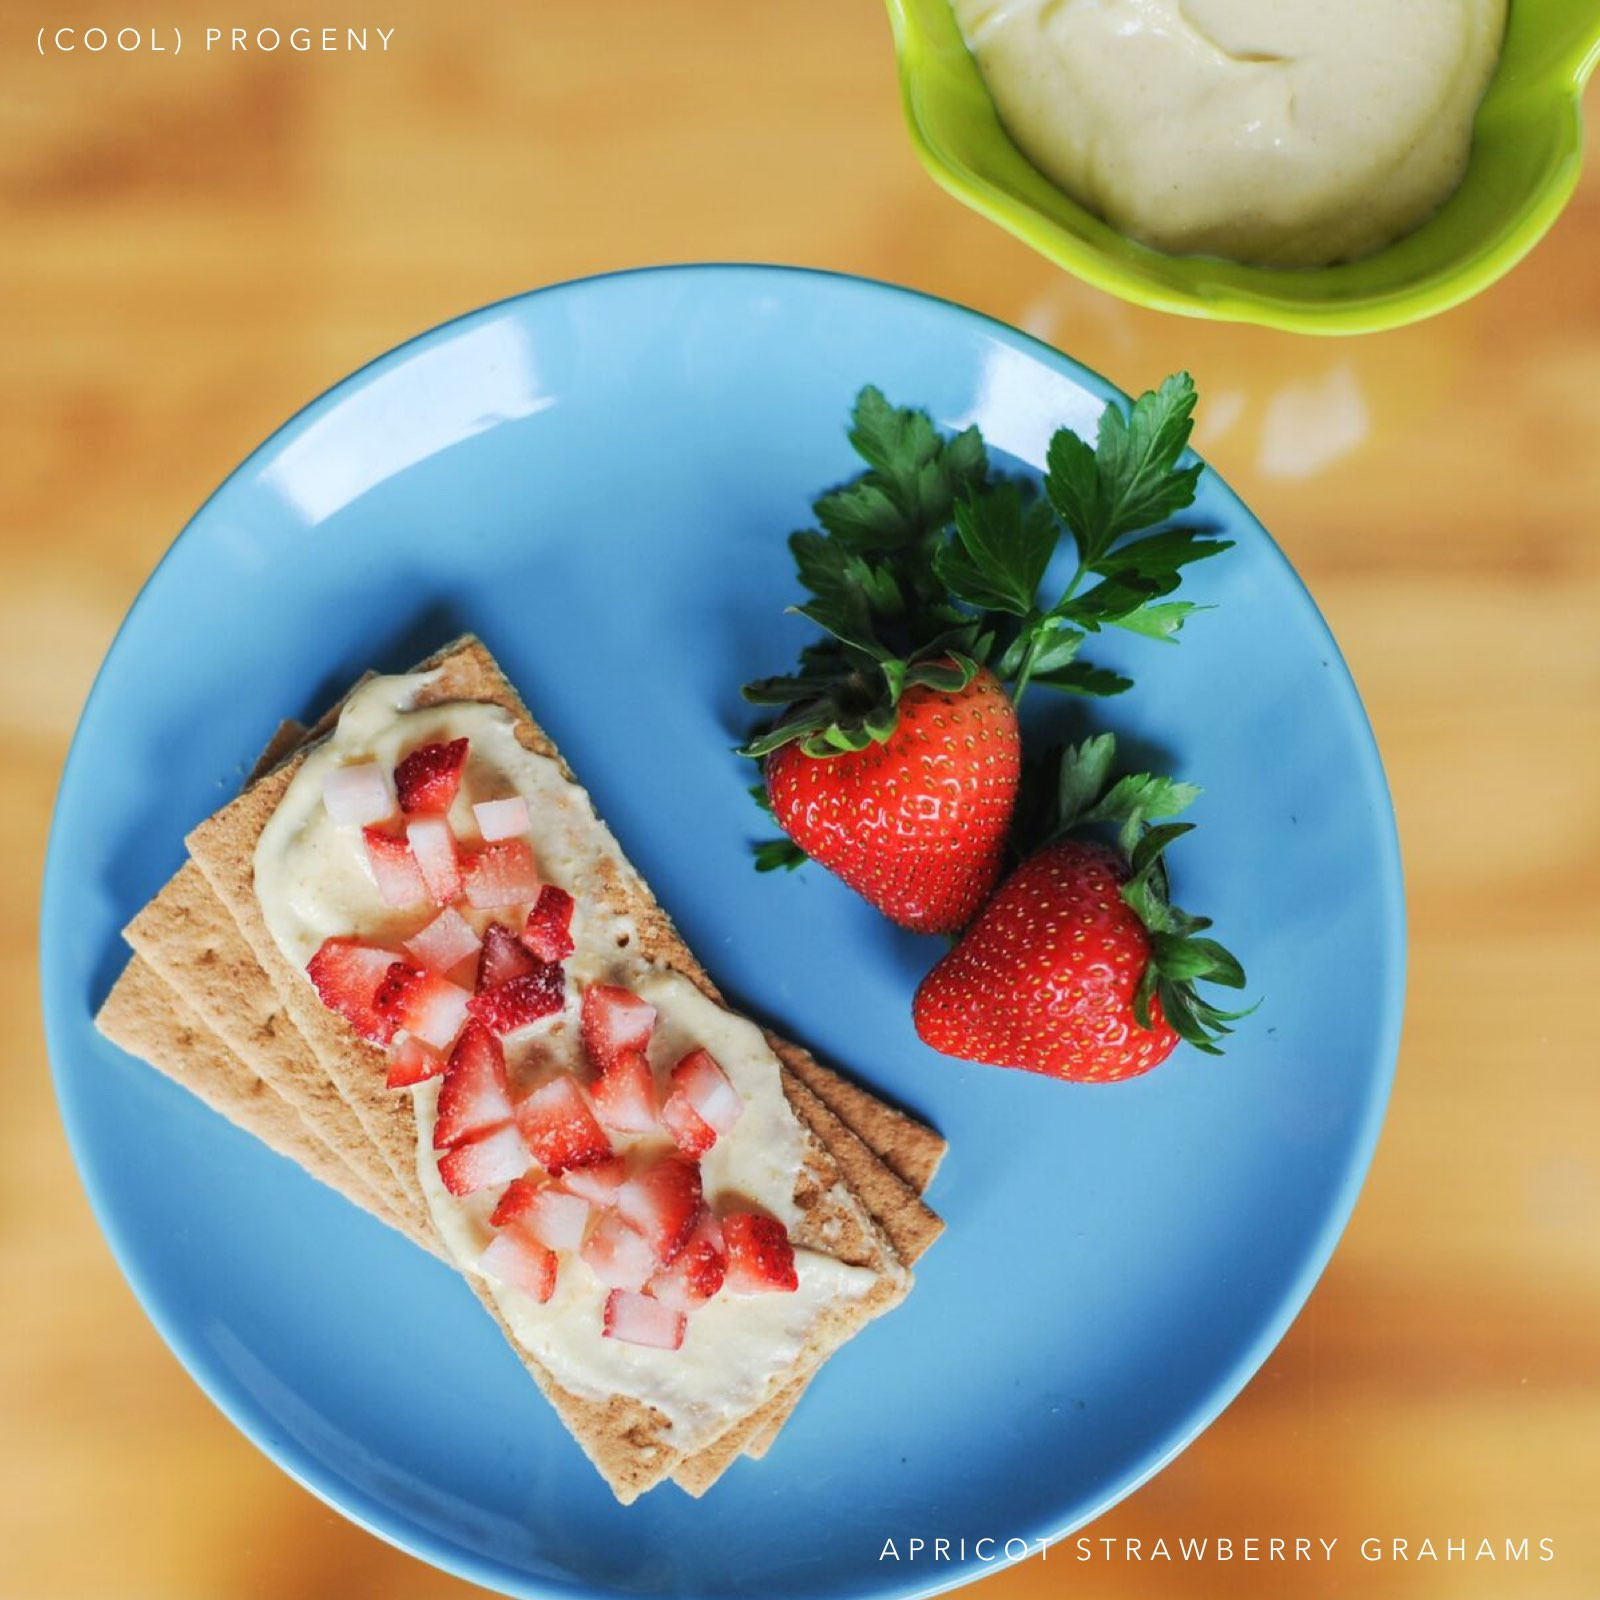 Healthy Summer Snacks
 five healthy summer snacks for kids cool progeny